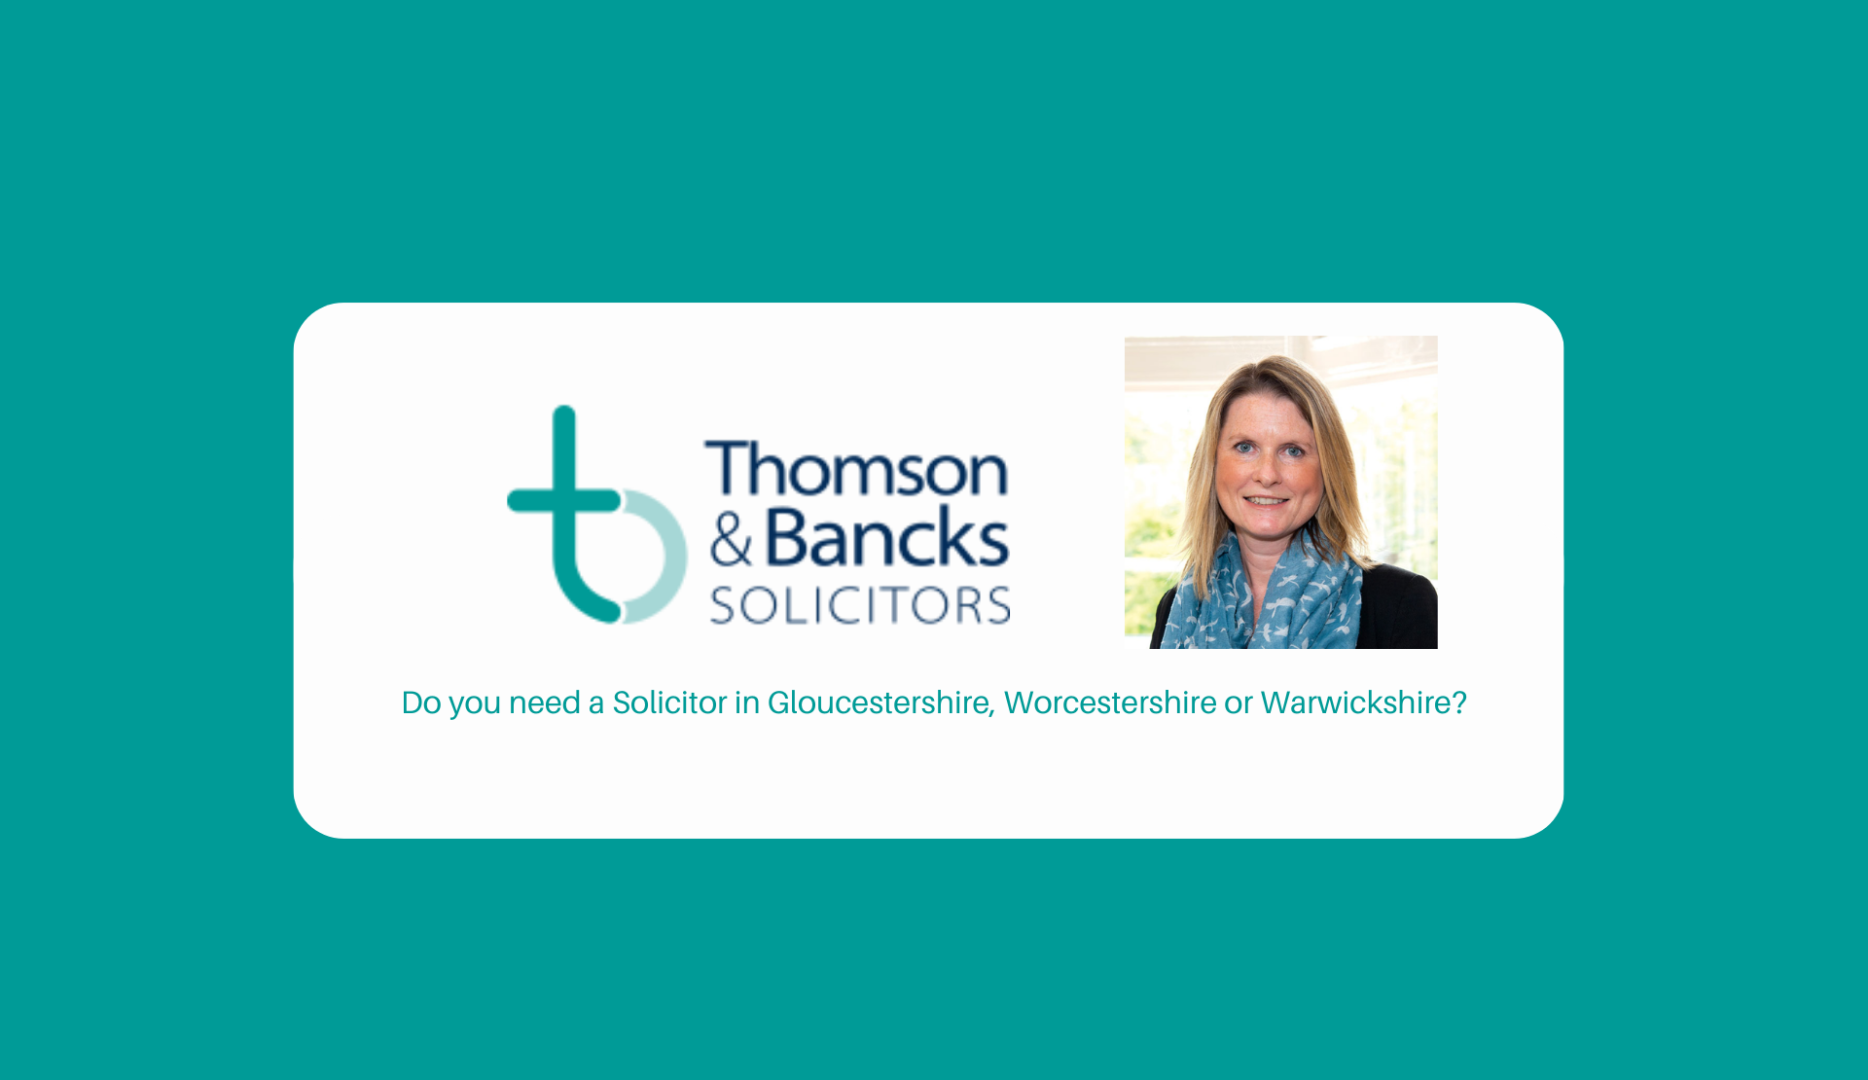 Thomson & Bancks Solicitors in Gloucester